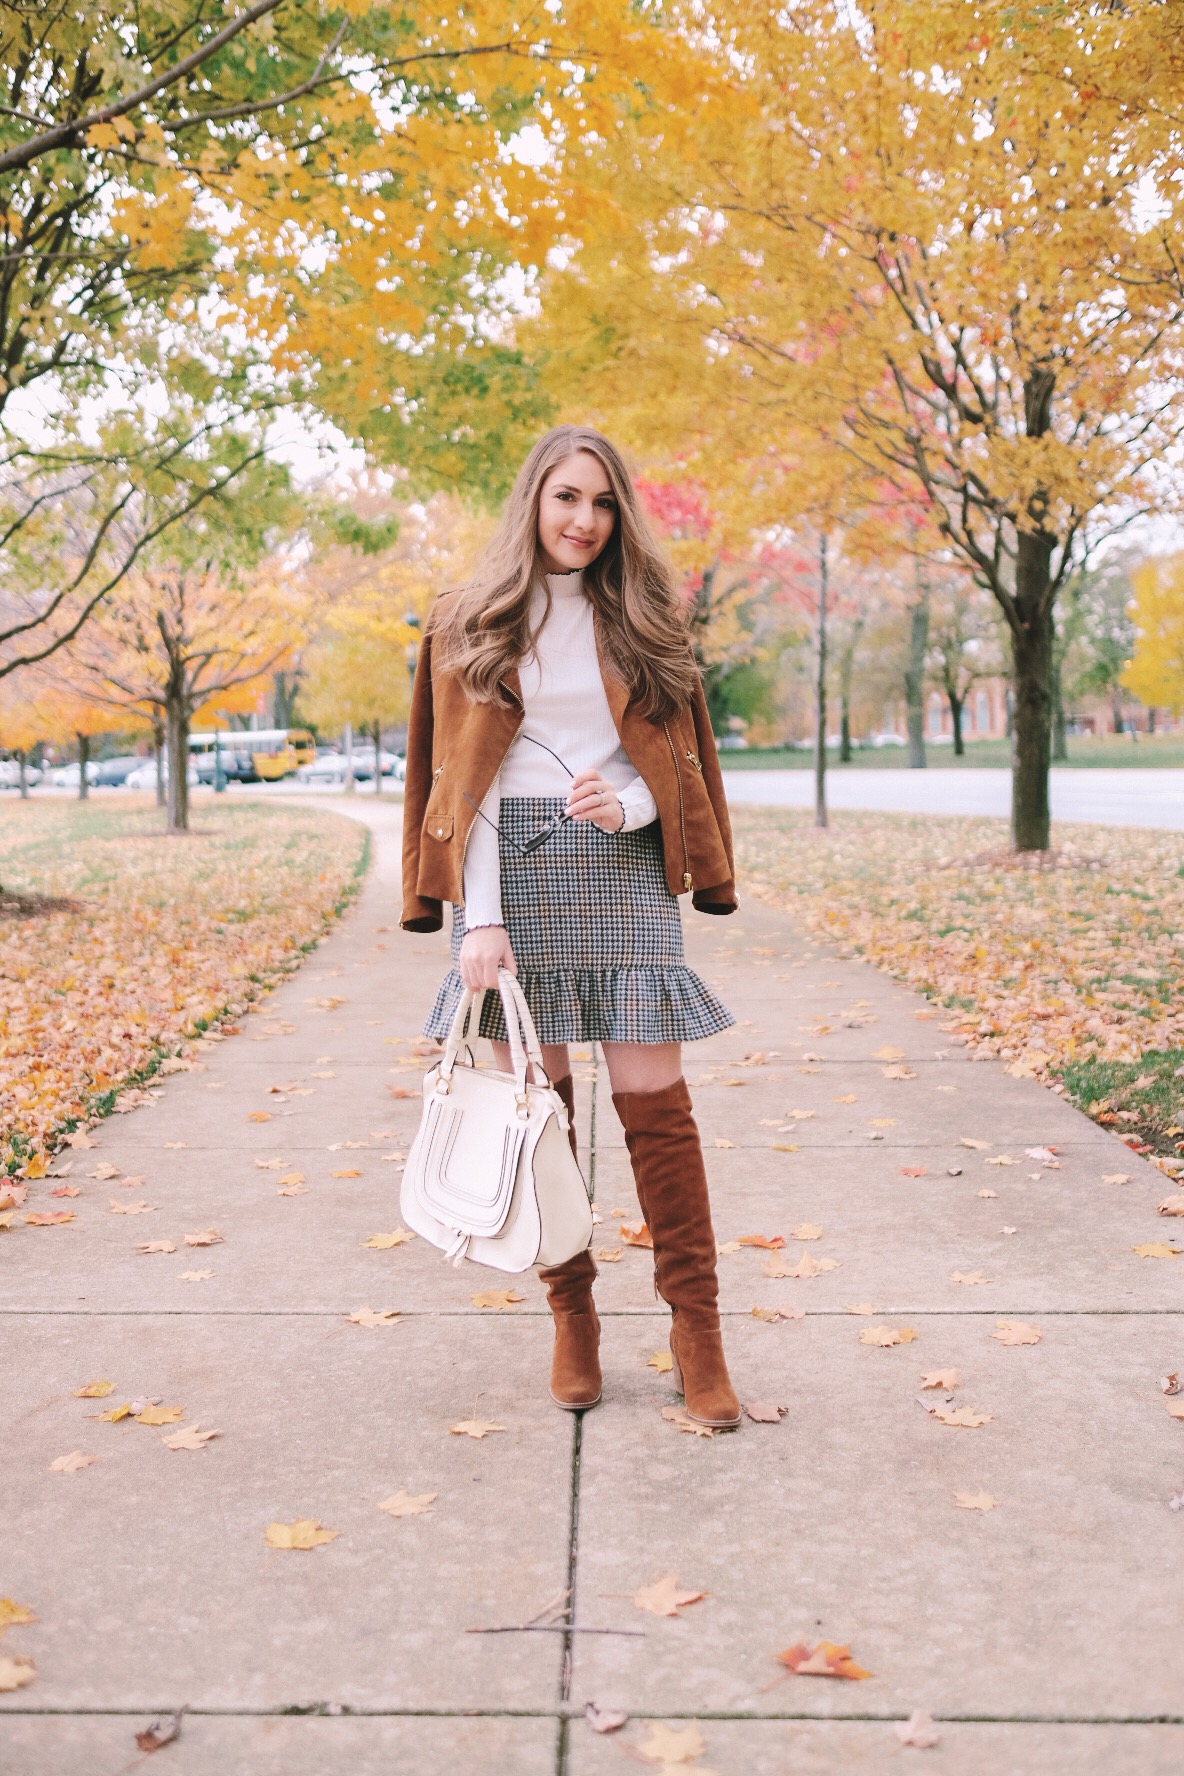 Plaid skirt and over the knee boots | Miss Madeline Rose